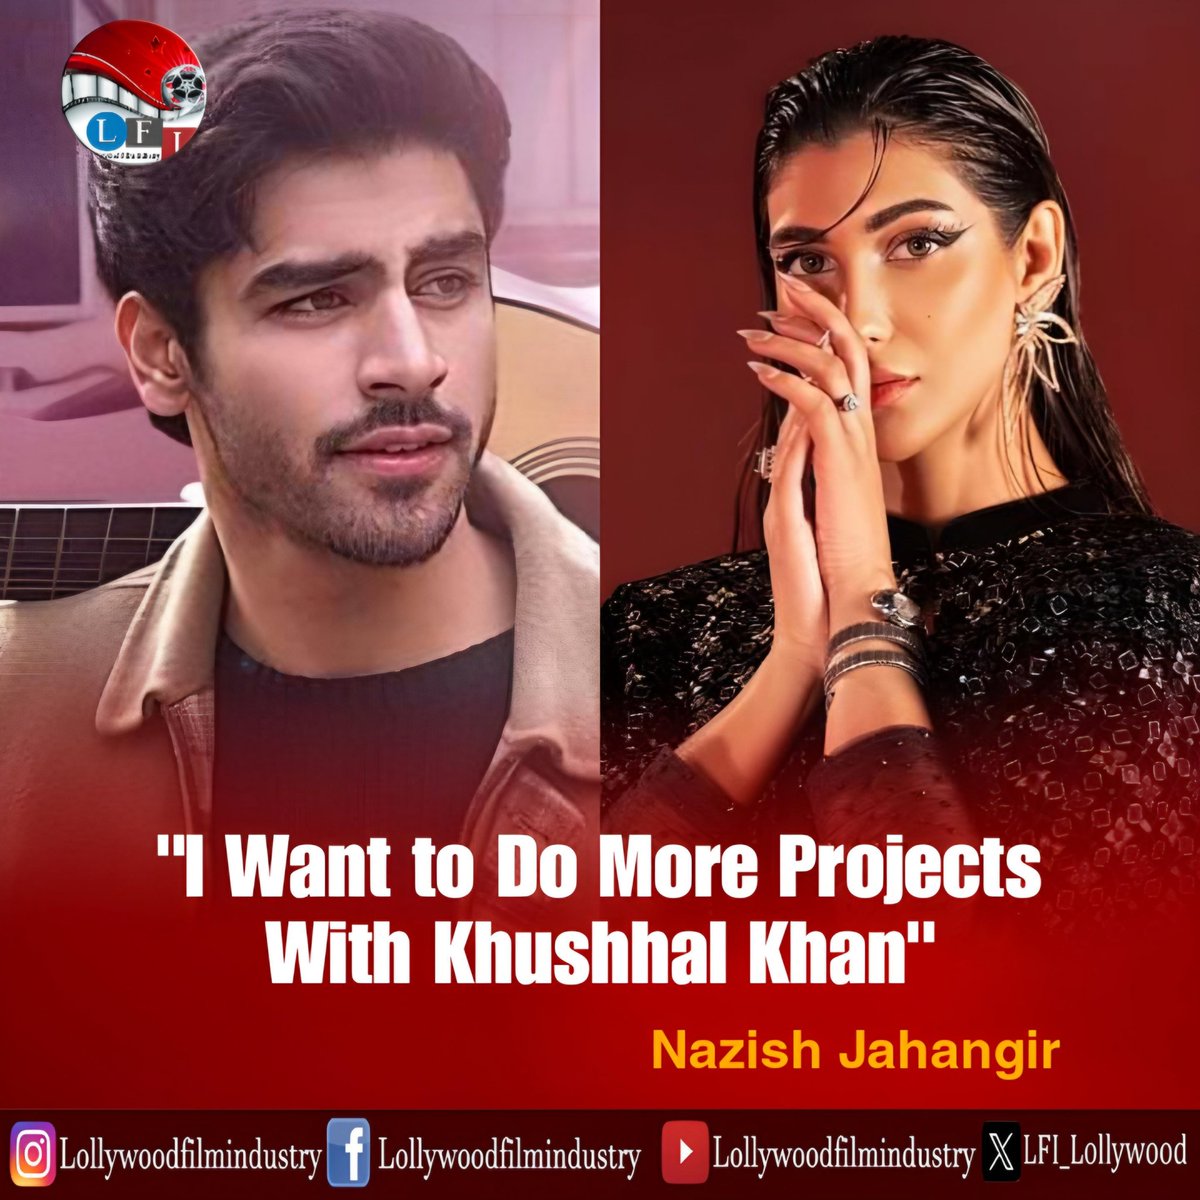 Nazish Jahangir Express her desire to do more projects with Khushhal khan as she believe he brings Energy on set.Their First Project 'Poppay Ki Wedding' Released today all over the World. #NazishJahangir #KhushhalKhan #films #PoppayKiWedding #cinema #LollywoodFilmindustry